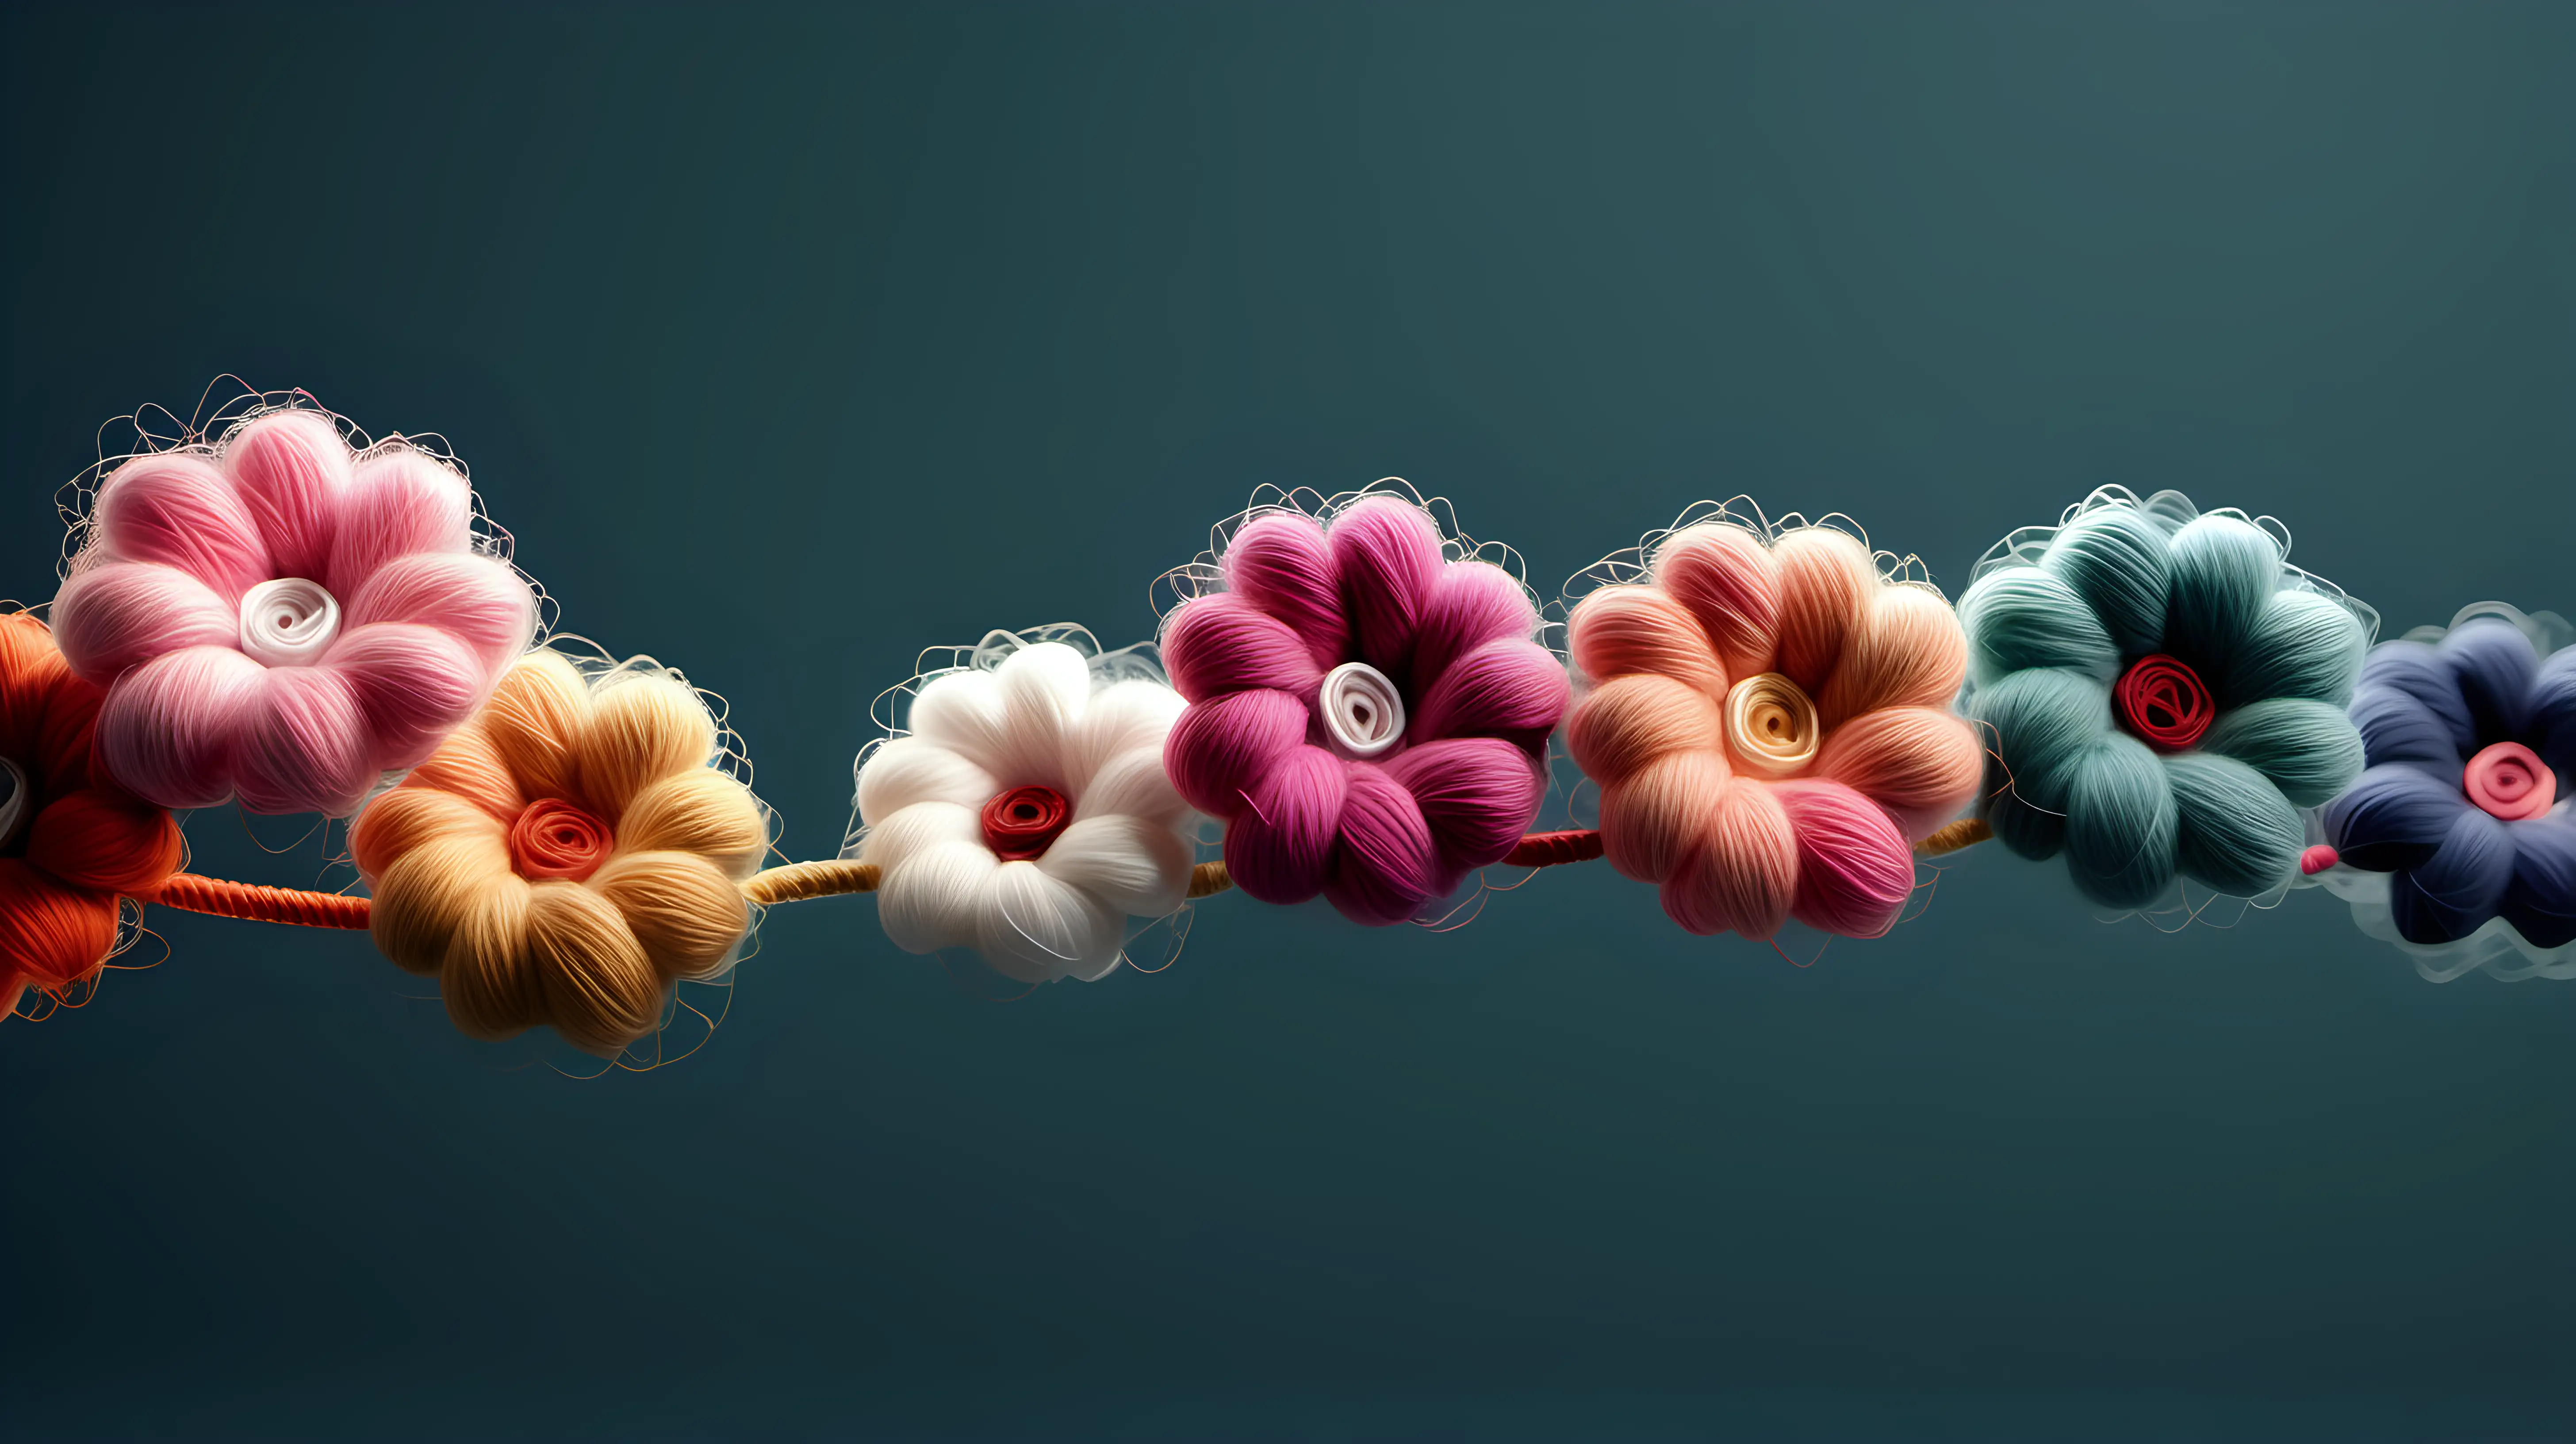 Vibrant 3D Woolen Thread Flowers in a Whimsical Dance